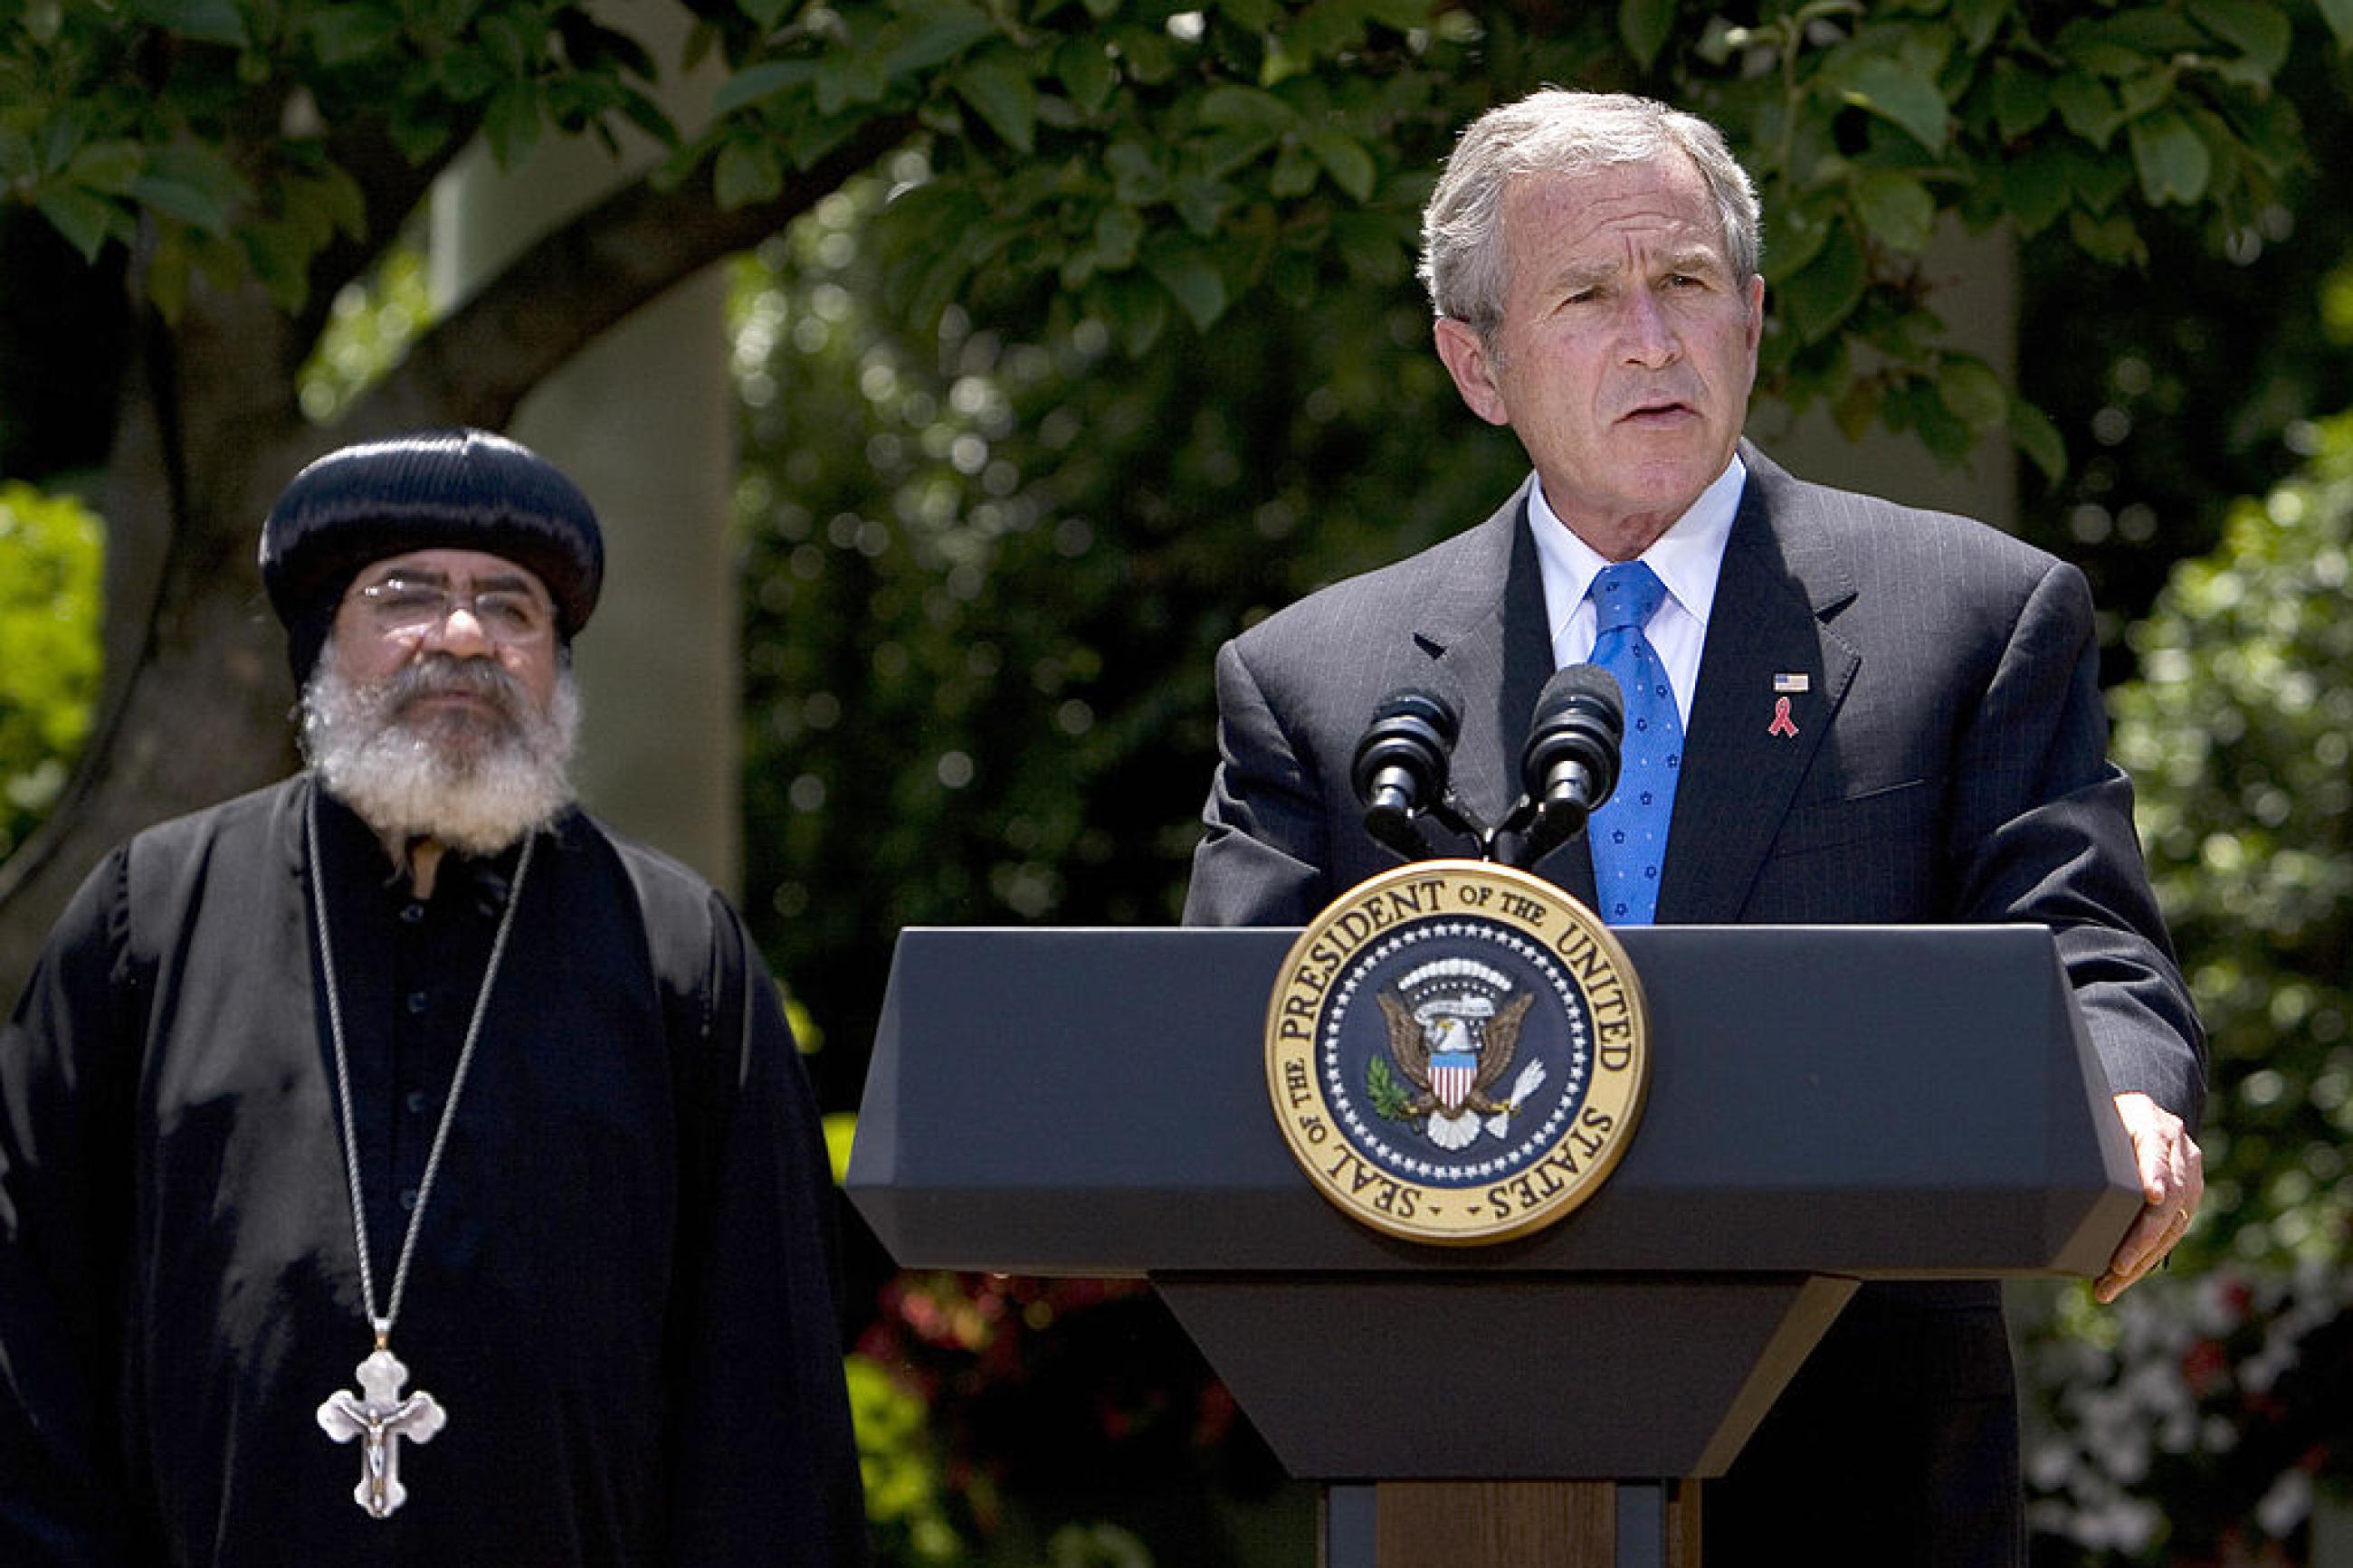 US President George W. Bush speaks on the President's Emergency Plan for AIDS Relief as Bishop Paul Yowakim looks on 30 May 2007 in the Rose Garden of the White House in Washington, DC.